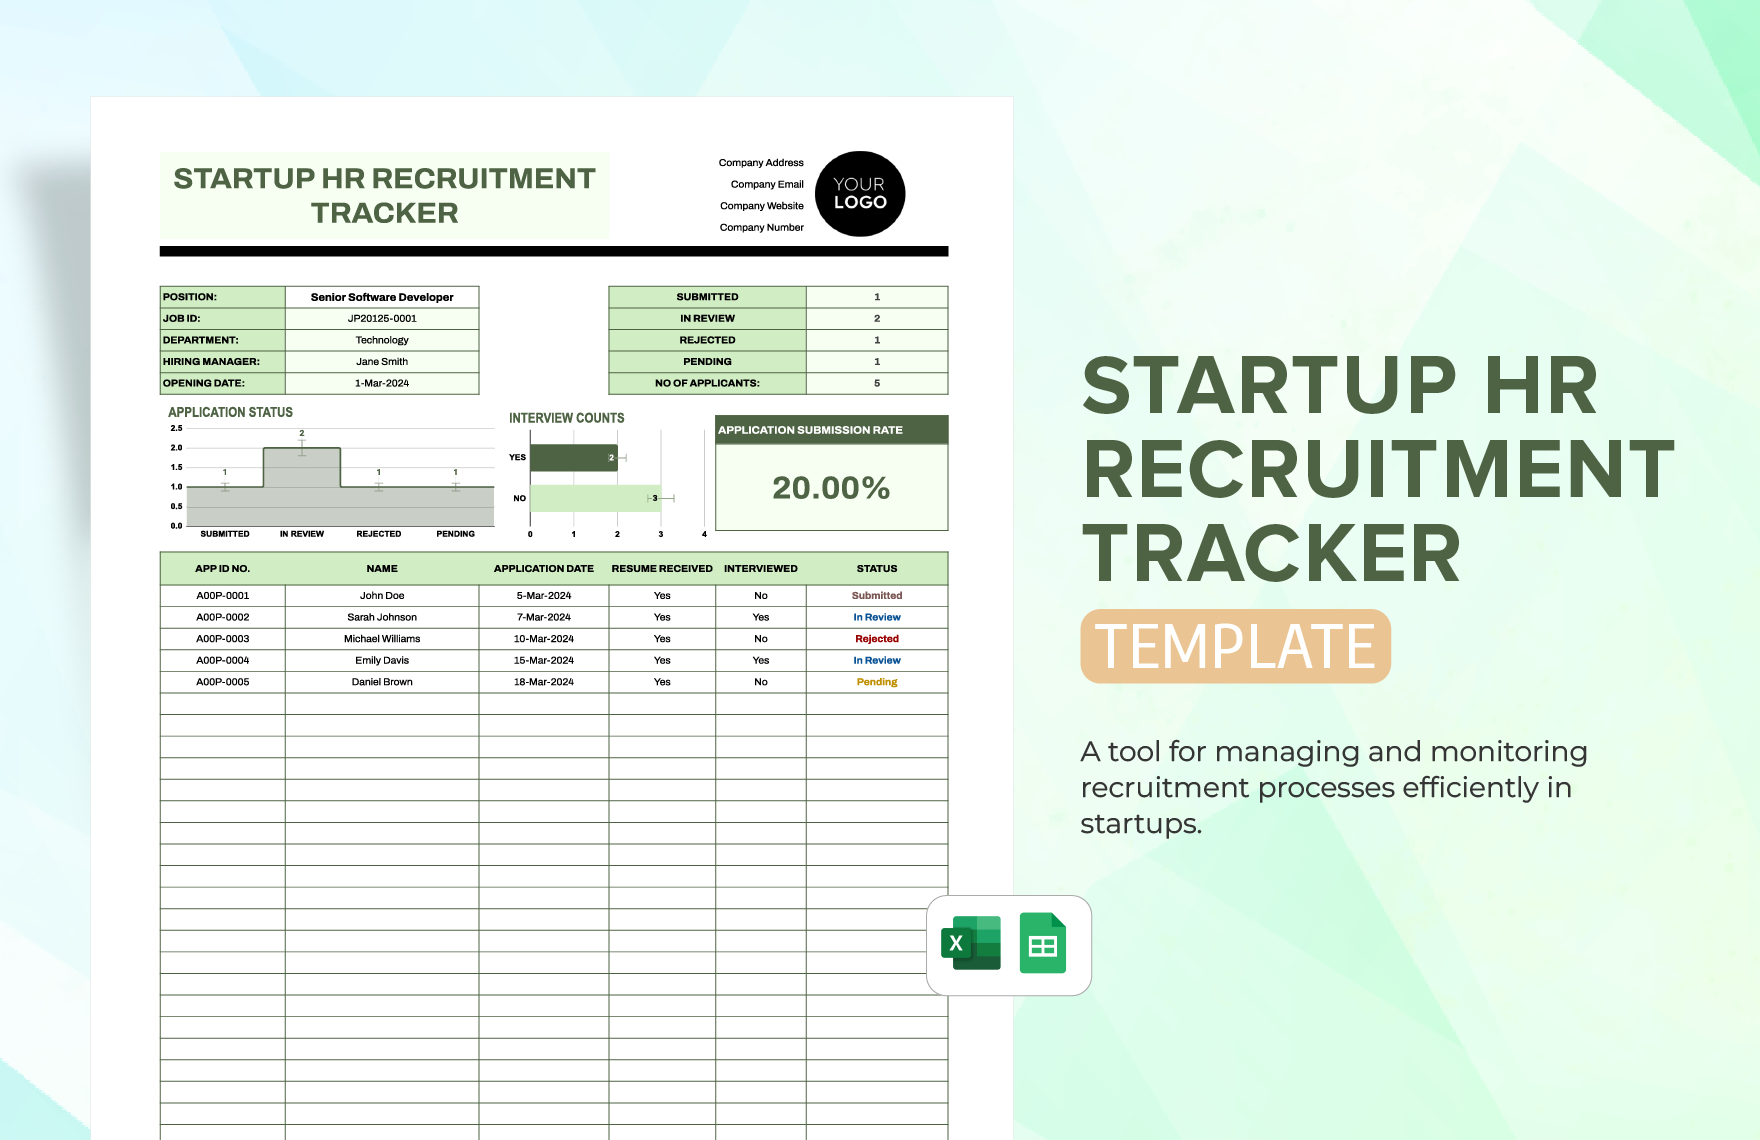 Startup HR Recruitment Tracker Template in Excel, Google Sheets